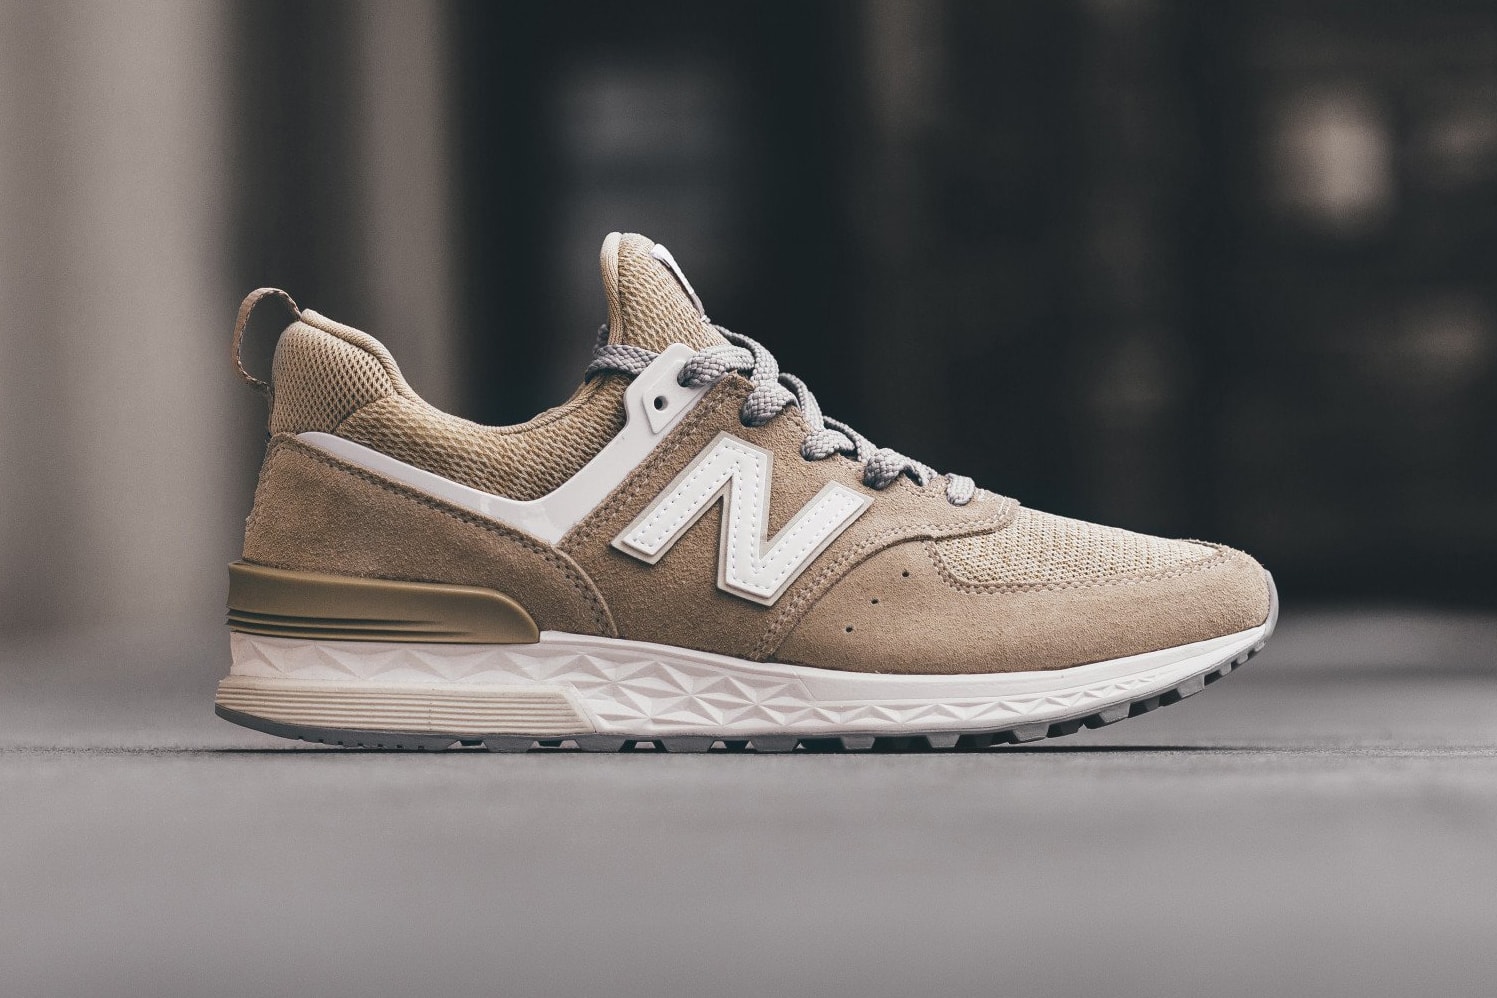 Up Close With The New Balance 574 Sport Details 